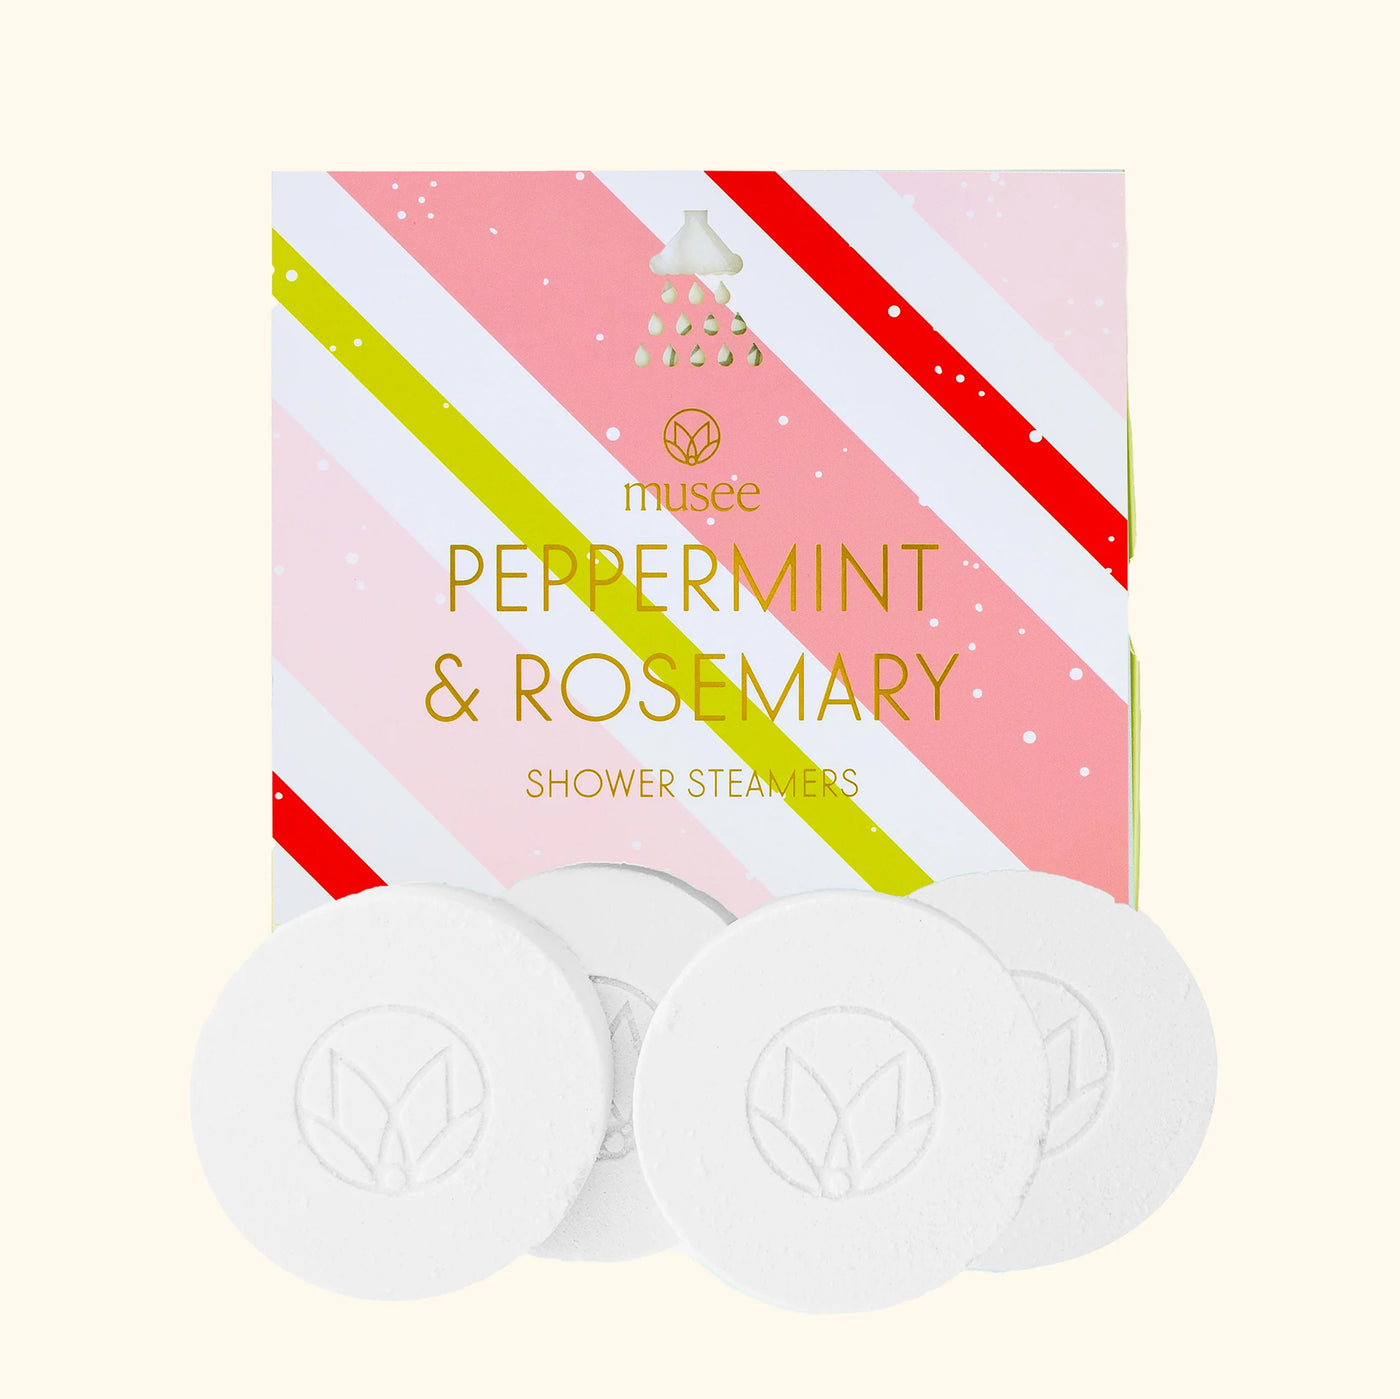 Peppermint & Rosemary Steamers